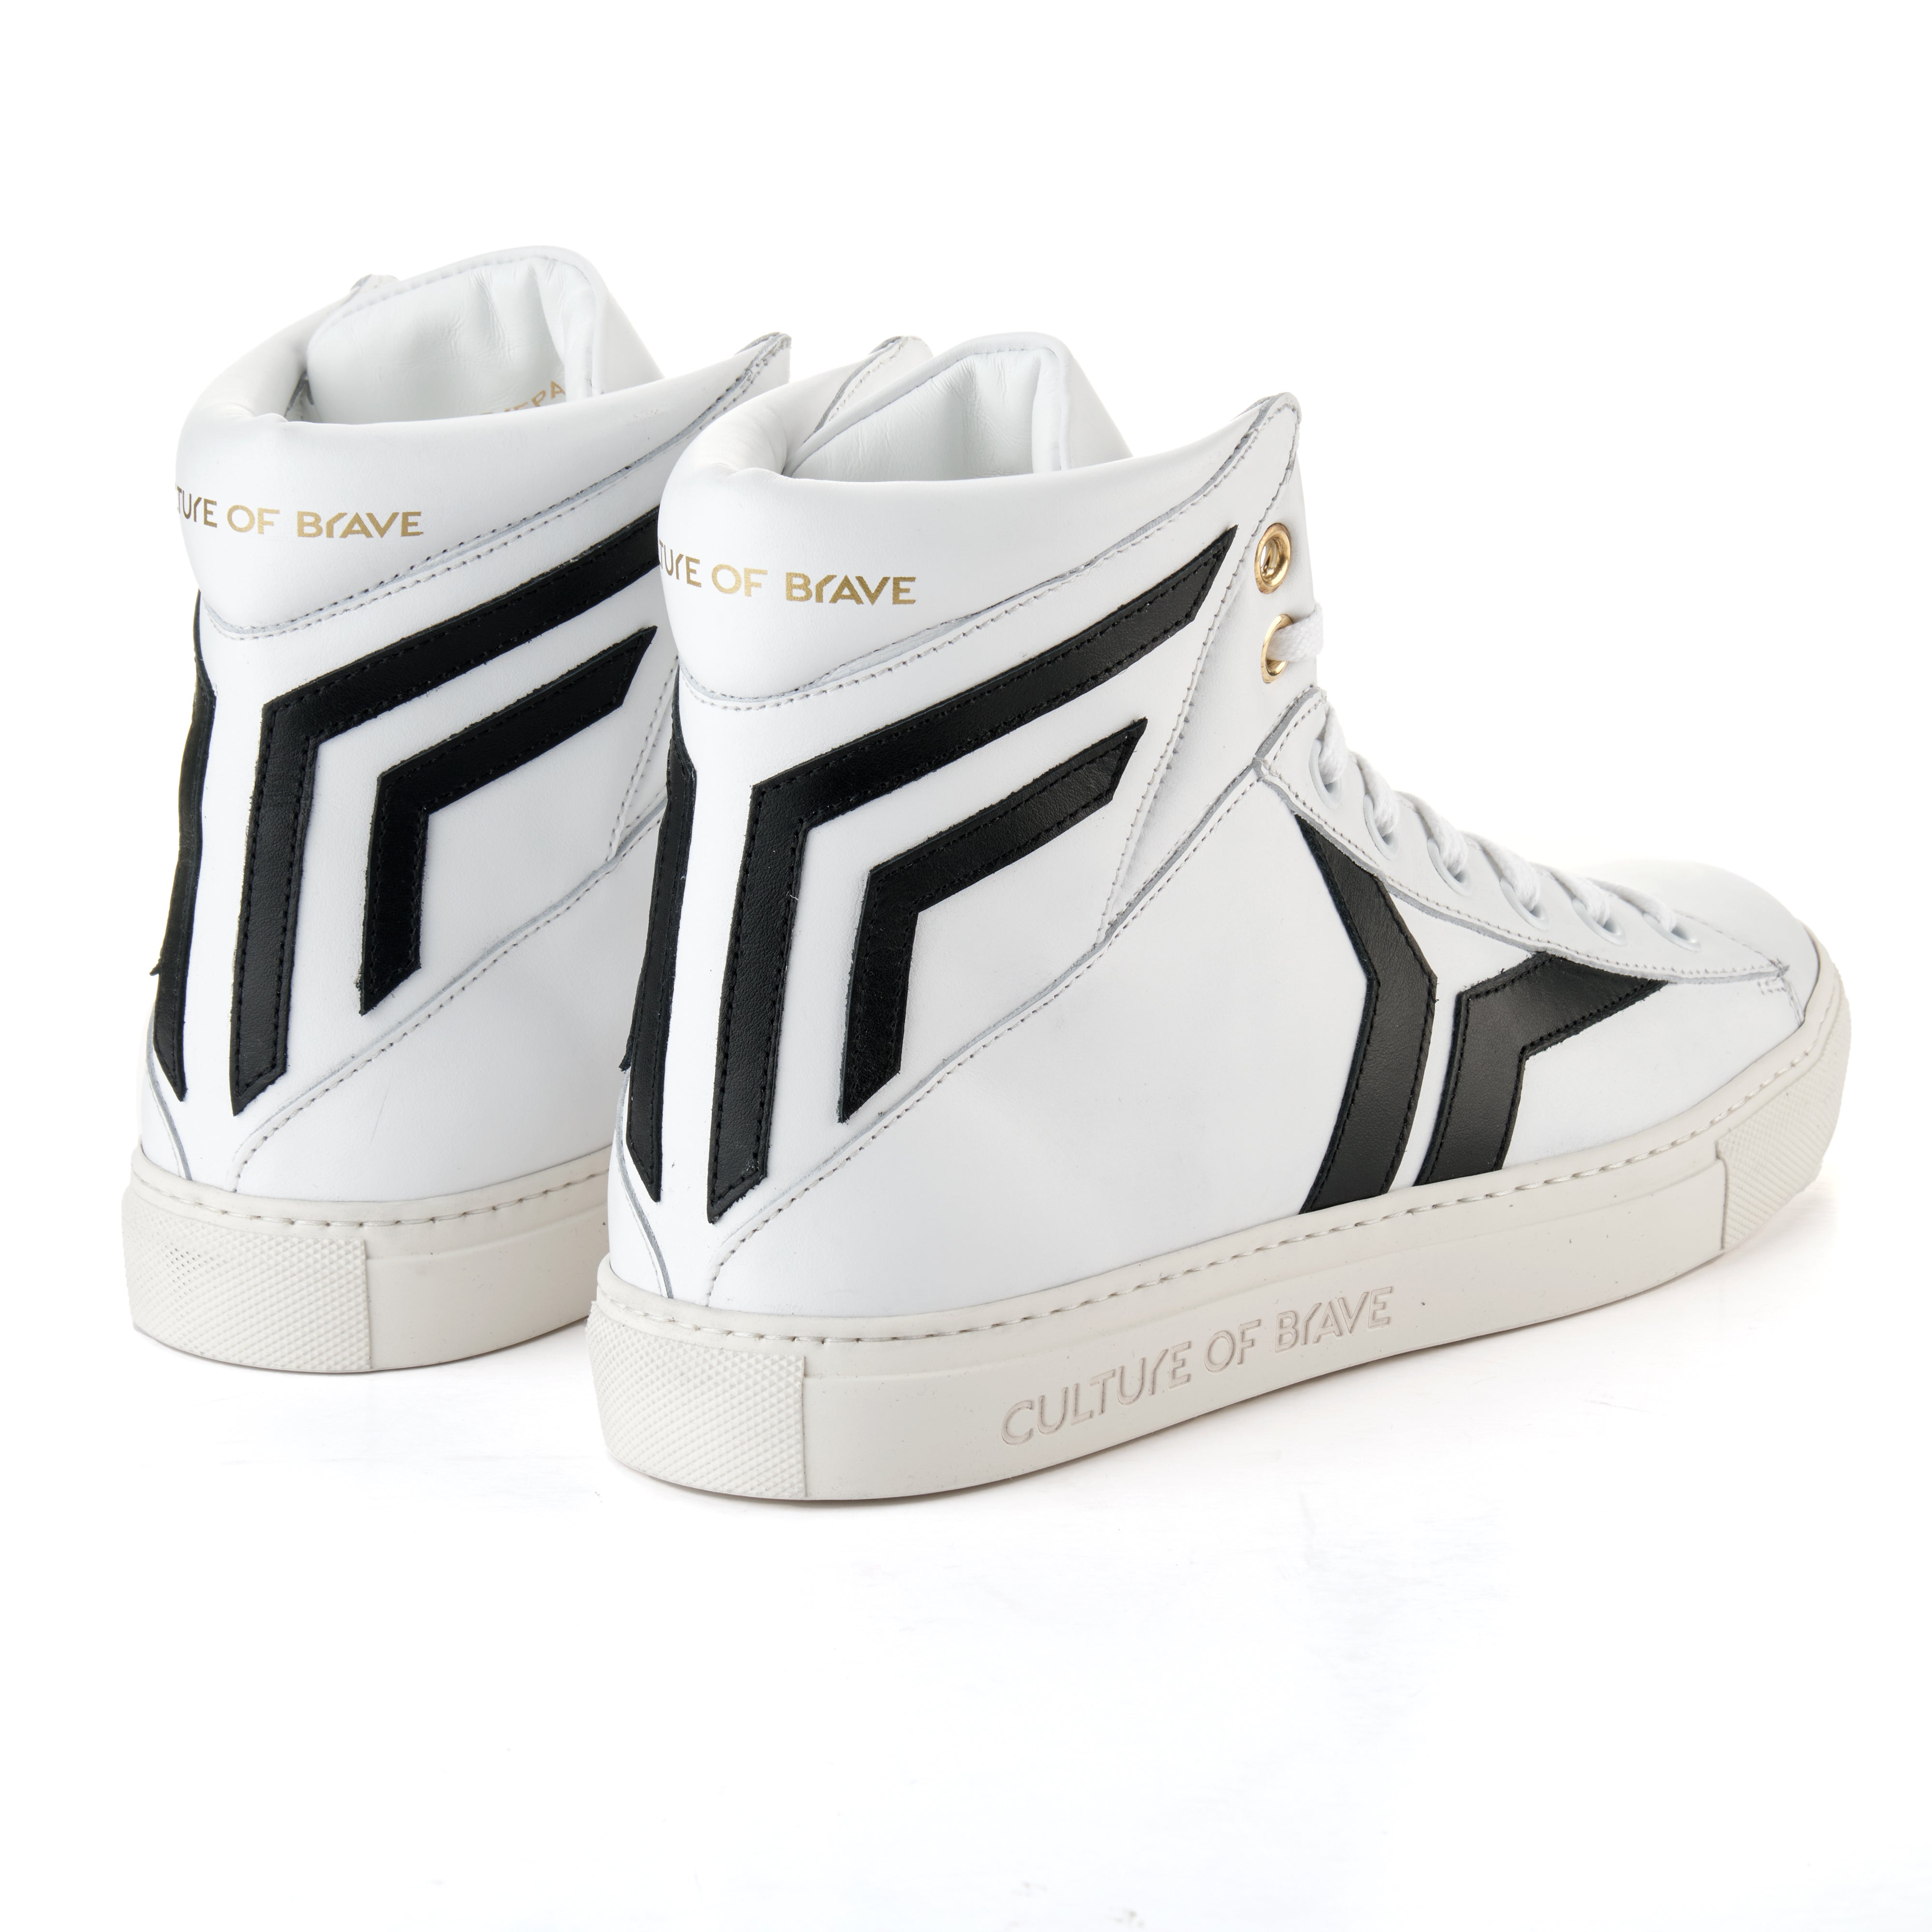 Prepared to Risk S34 Men White leather black wing high cut